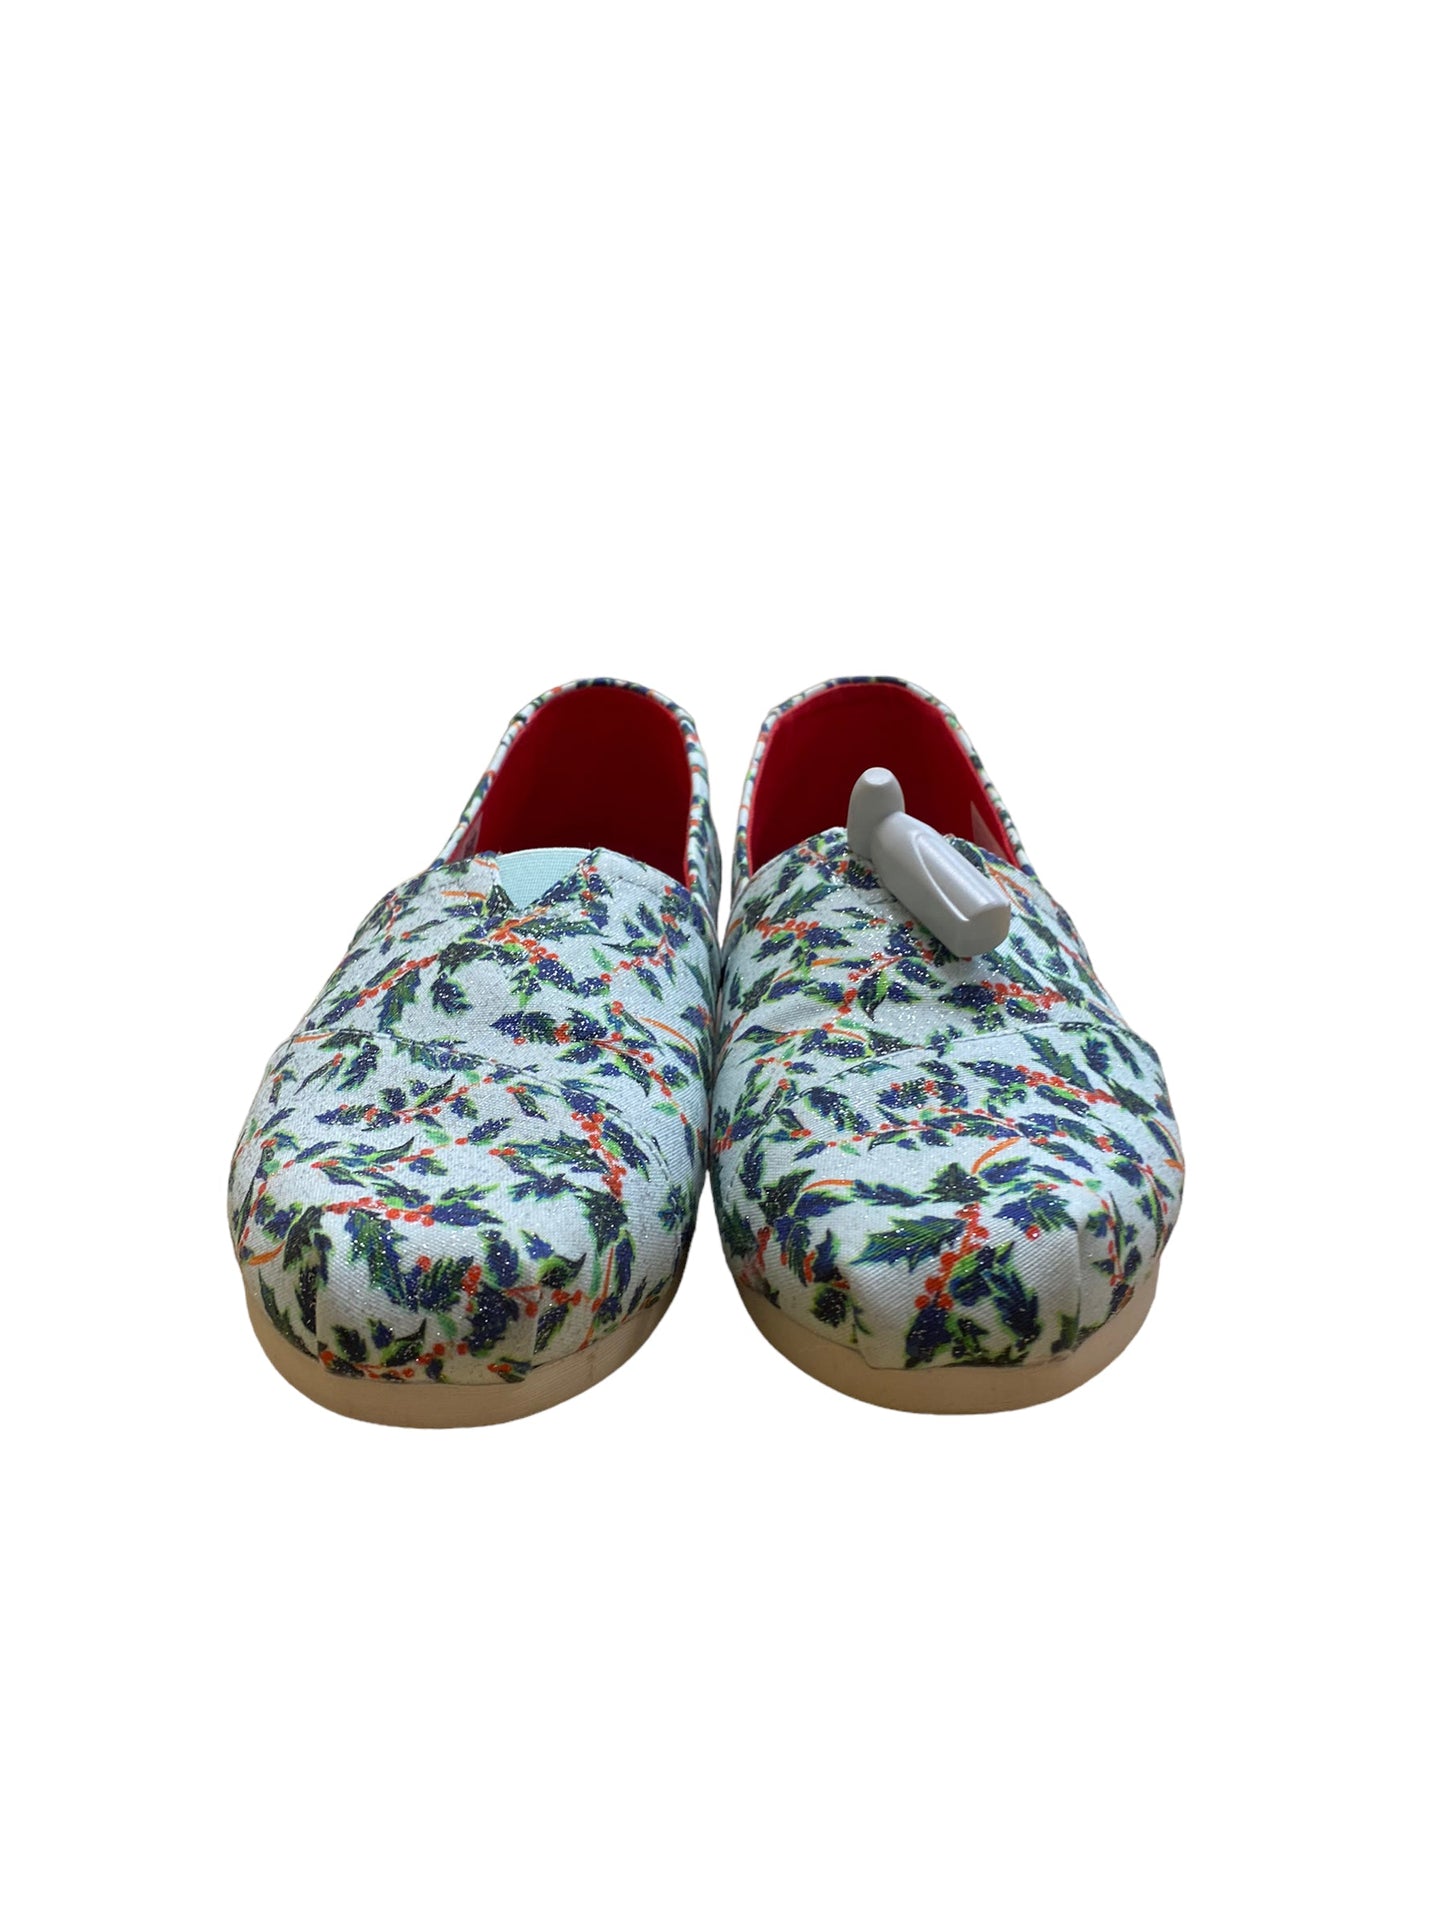 Shoes Flats Boat By Toms  Size: 10